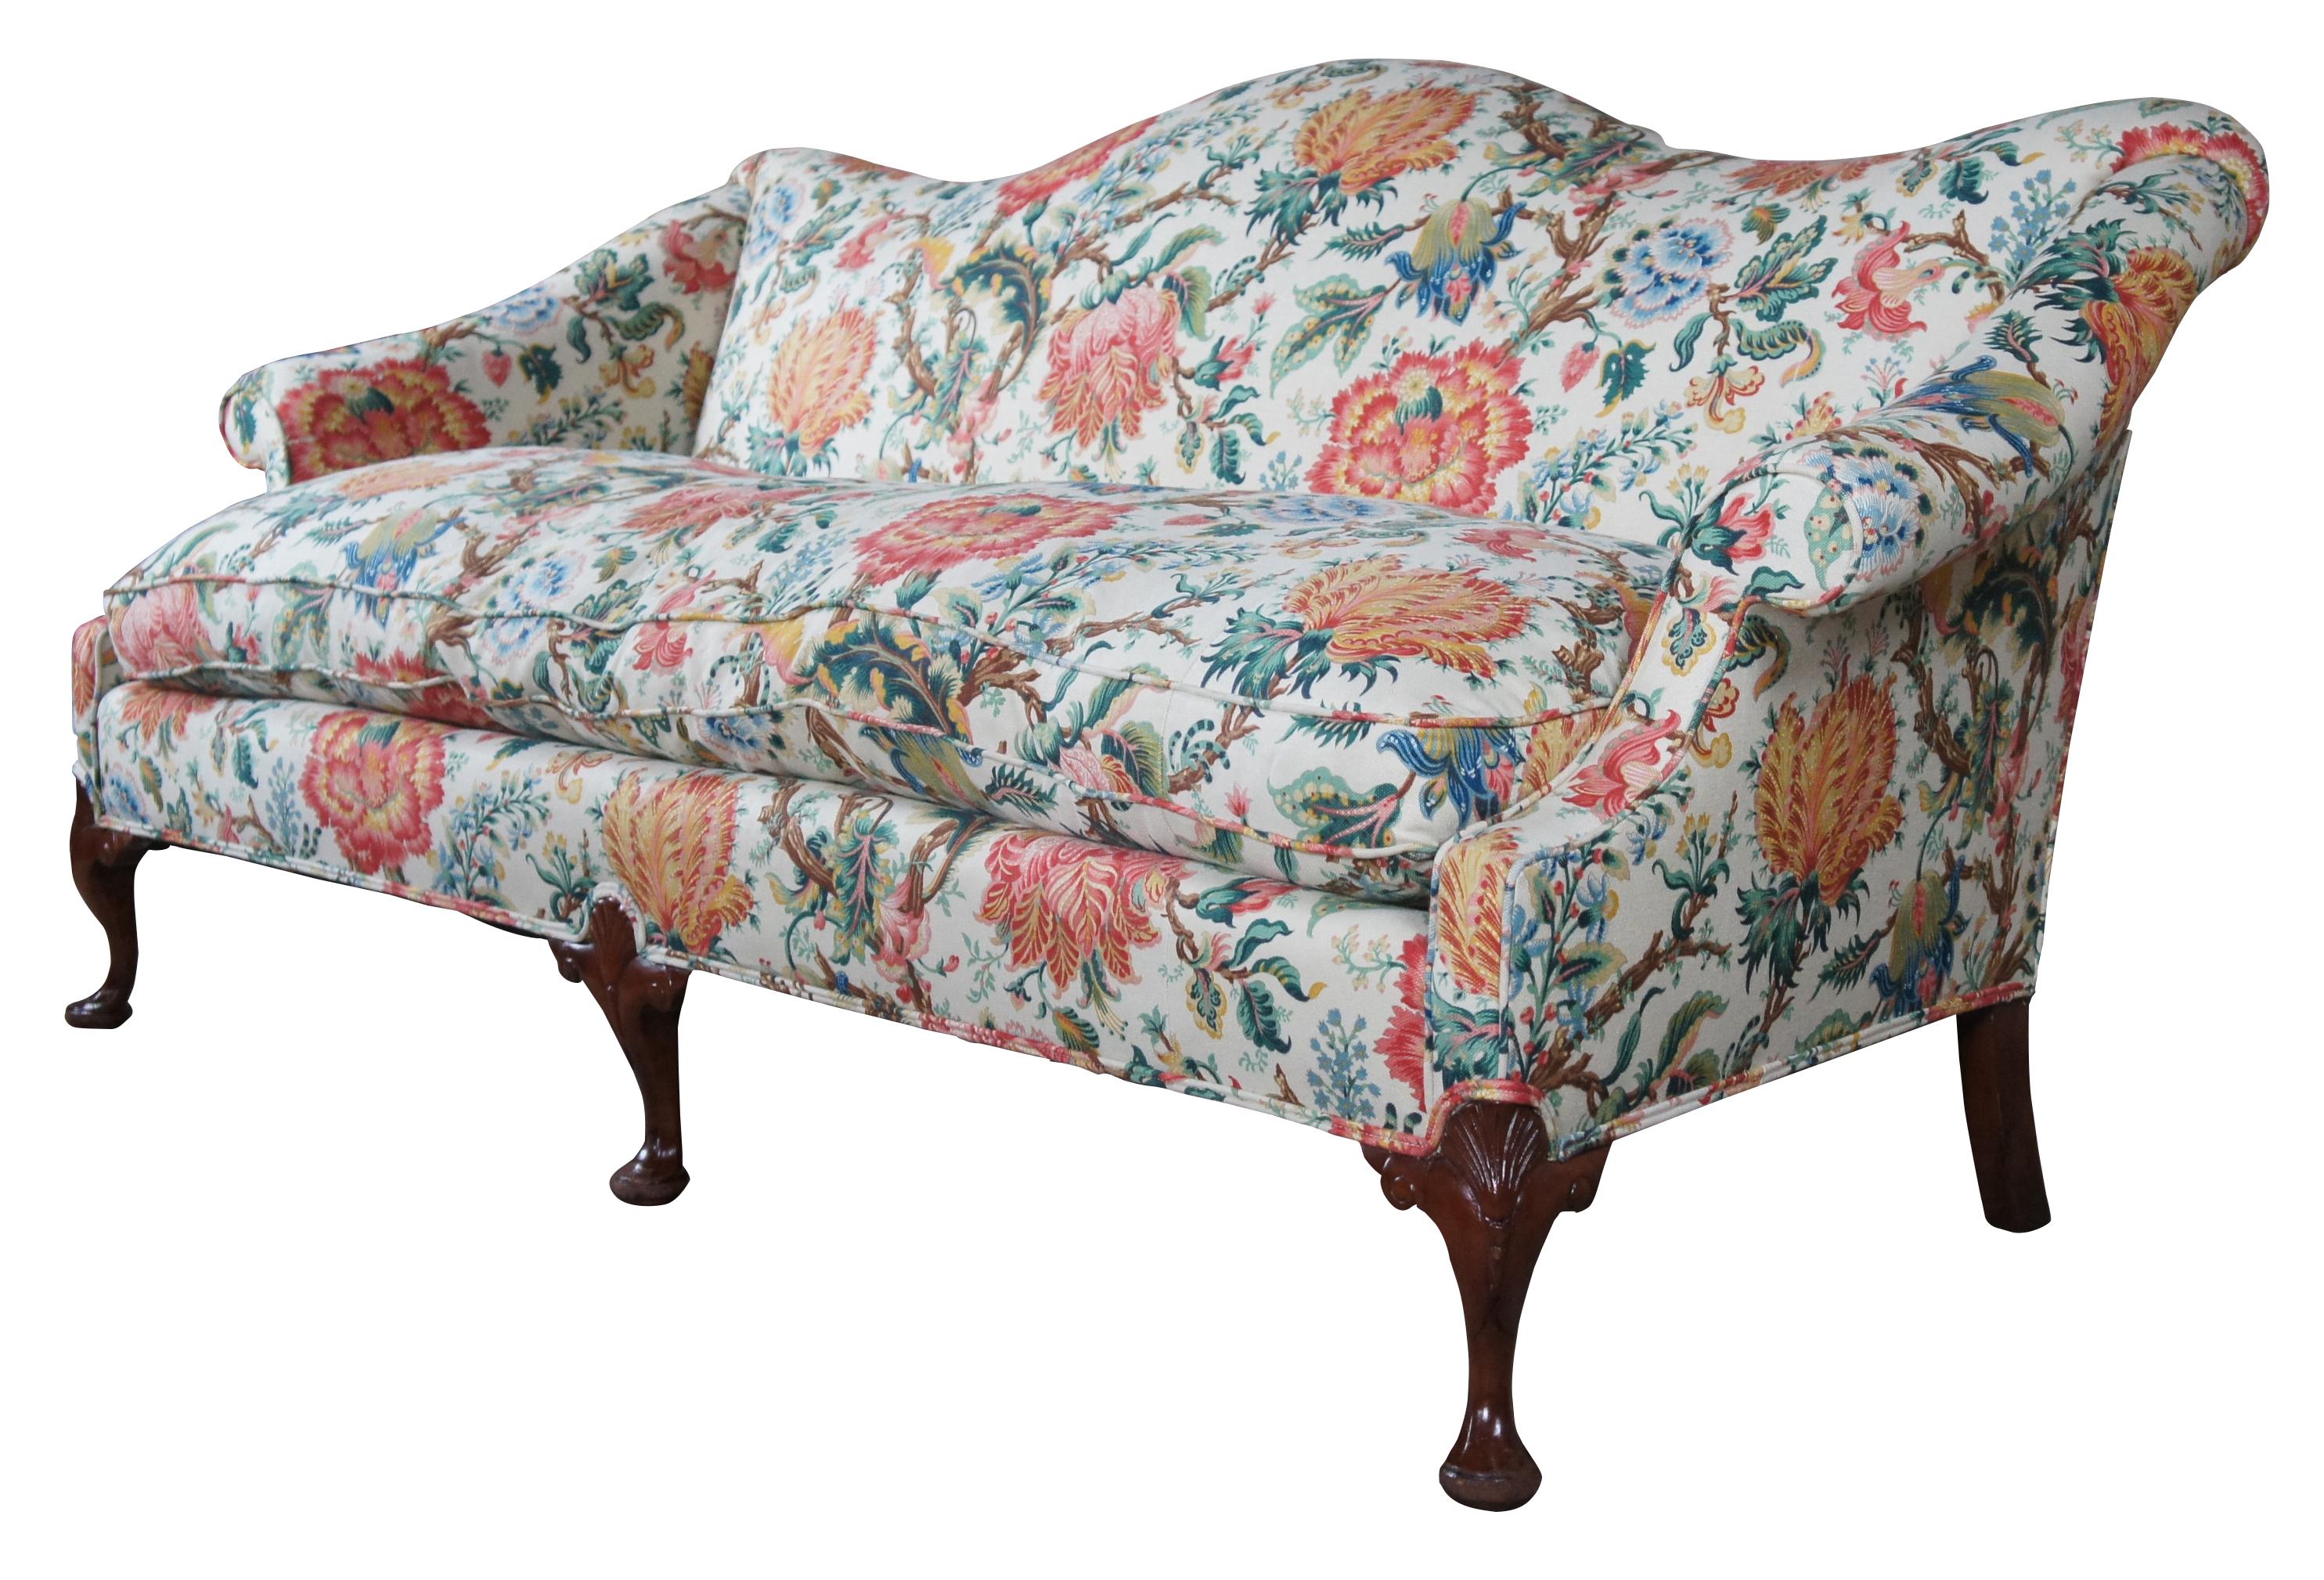 An exquisite Queen Anne style camelback settee or sofa, circa mid-20th century. Features a beautiful swooping back, rolled arms and large removable down filled seat. The settee is supported by cabriole legs with scallop carved knees, scrolling